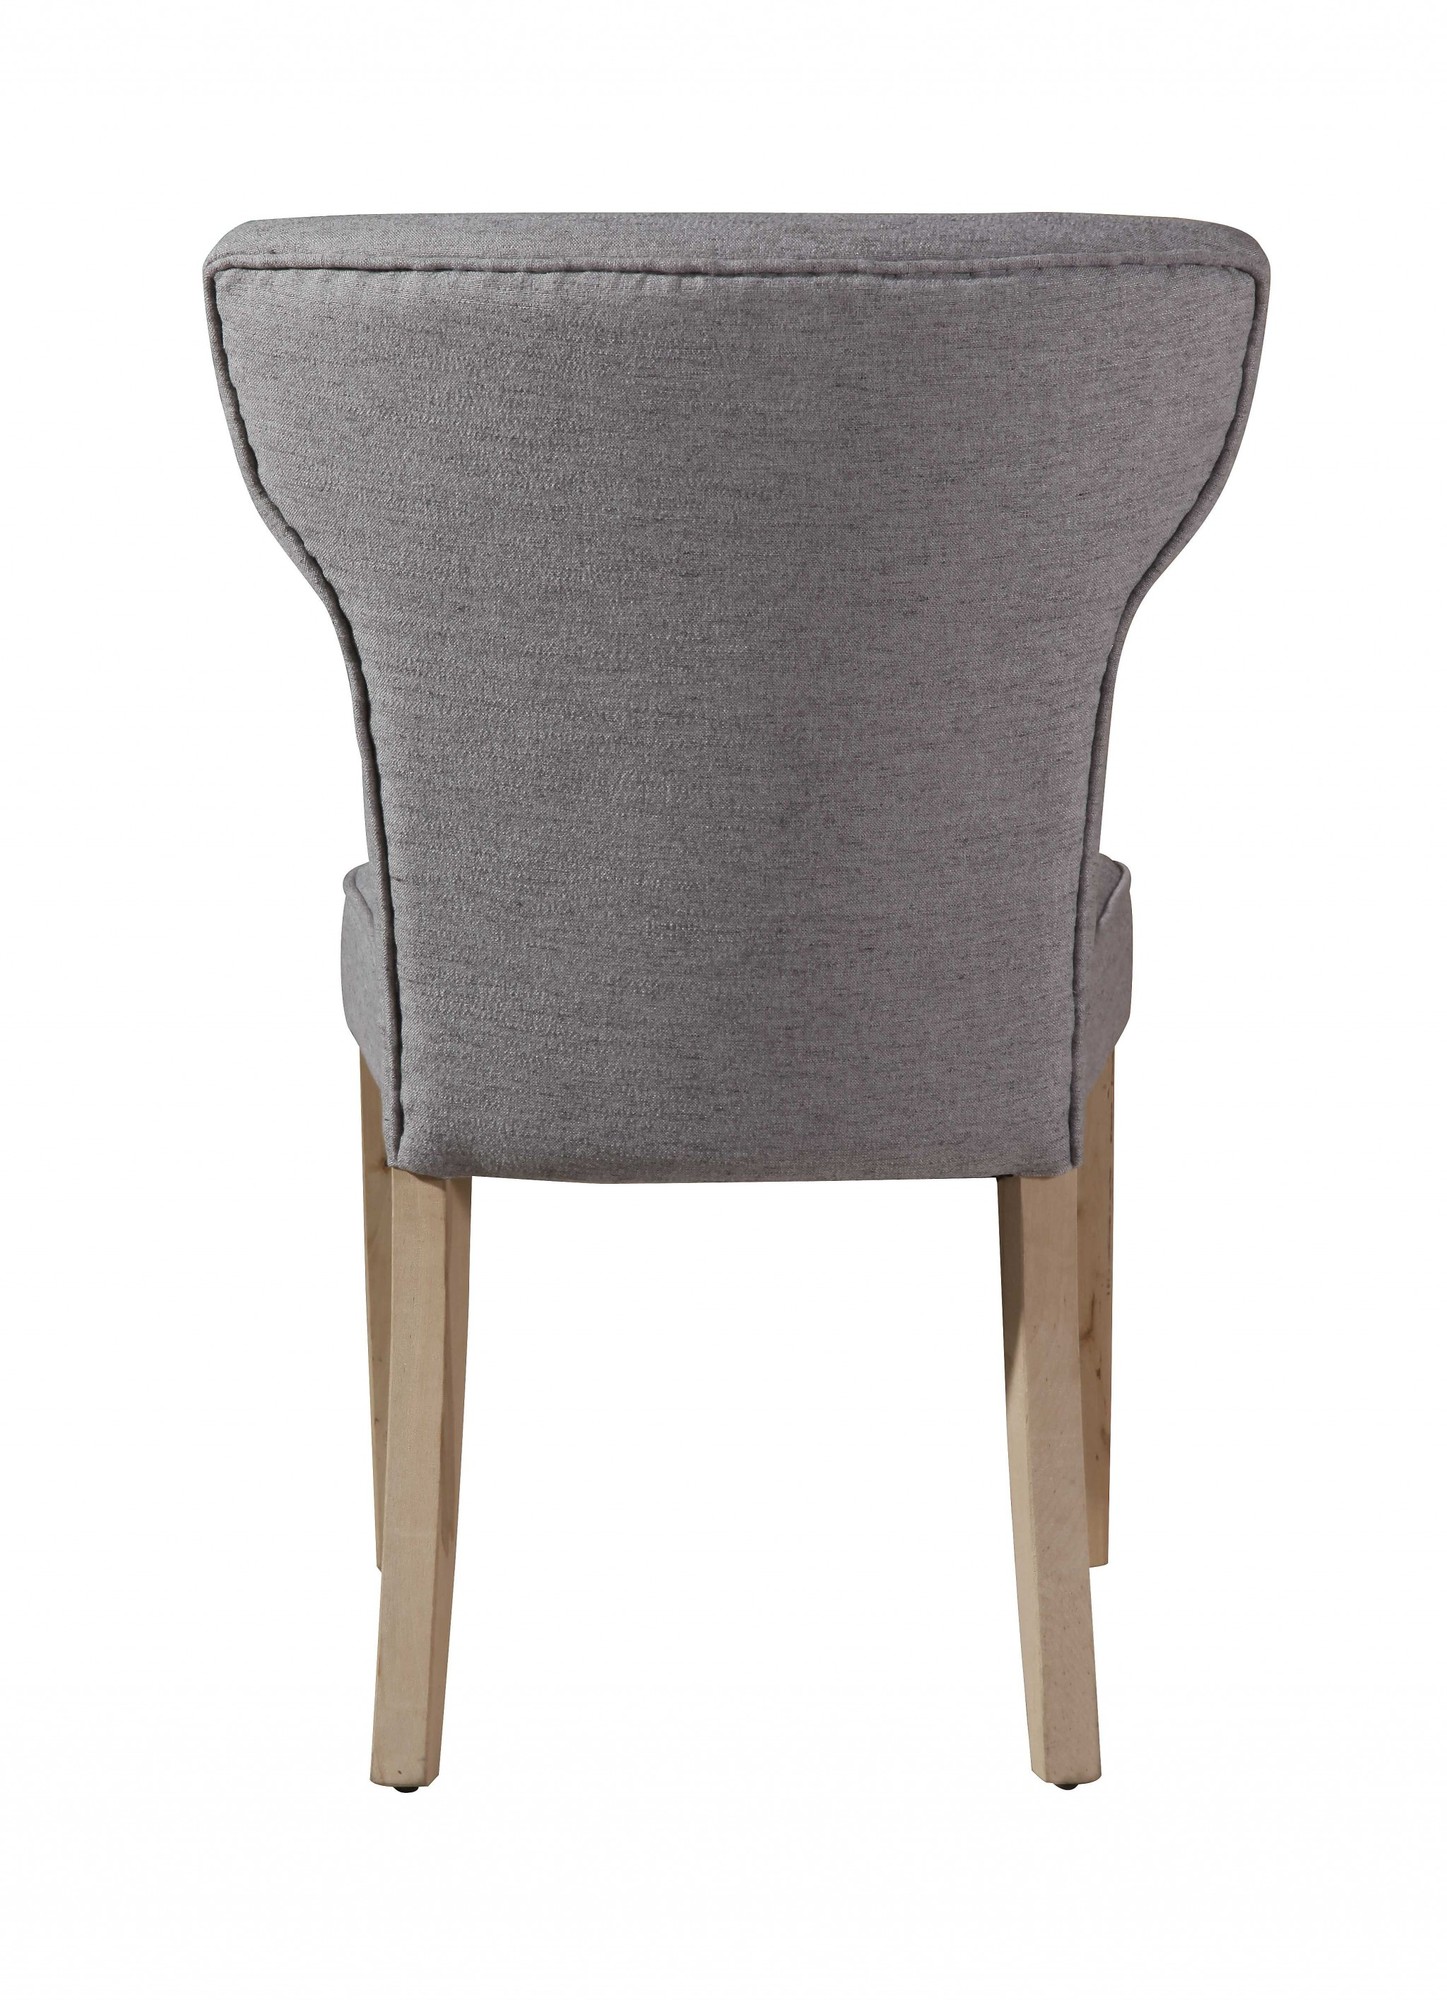 19.5" X 21" X 34" Charcoal Wood Polyester Dining Chair